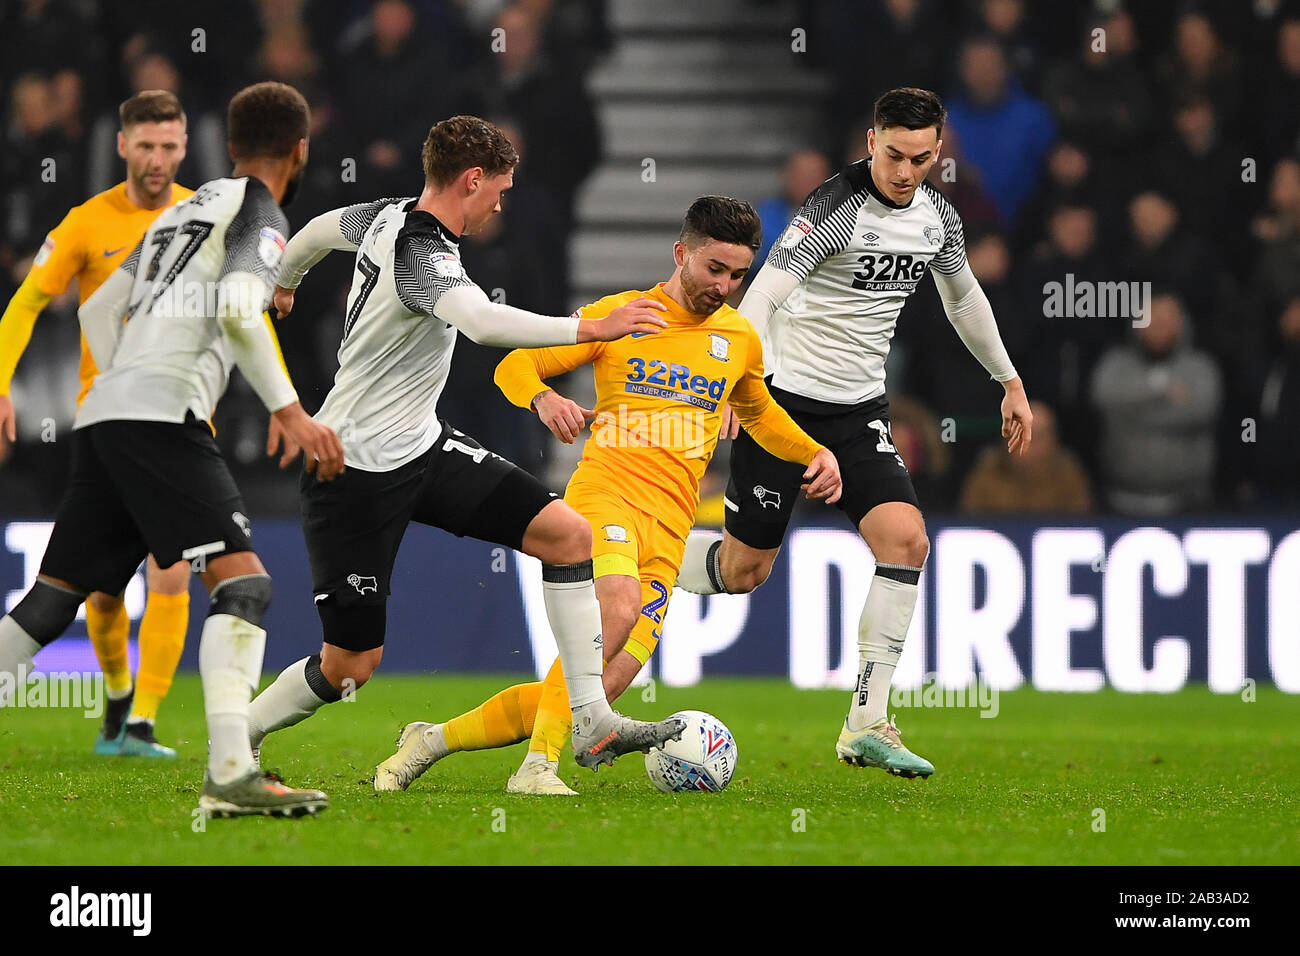 23rd November 2019, Pride Park Stadium, Derby, England; Sky Bet Championship, Derby County v Preston North End : Sean Maguire (24) of Preston North End battles with George Evans (17) of Derby County  Credit: Jon Hobley/News Images Stock Photo